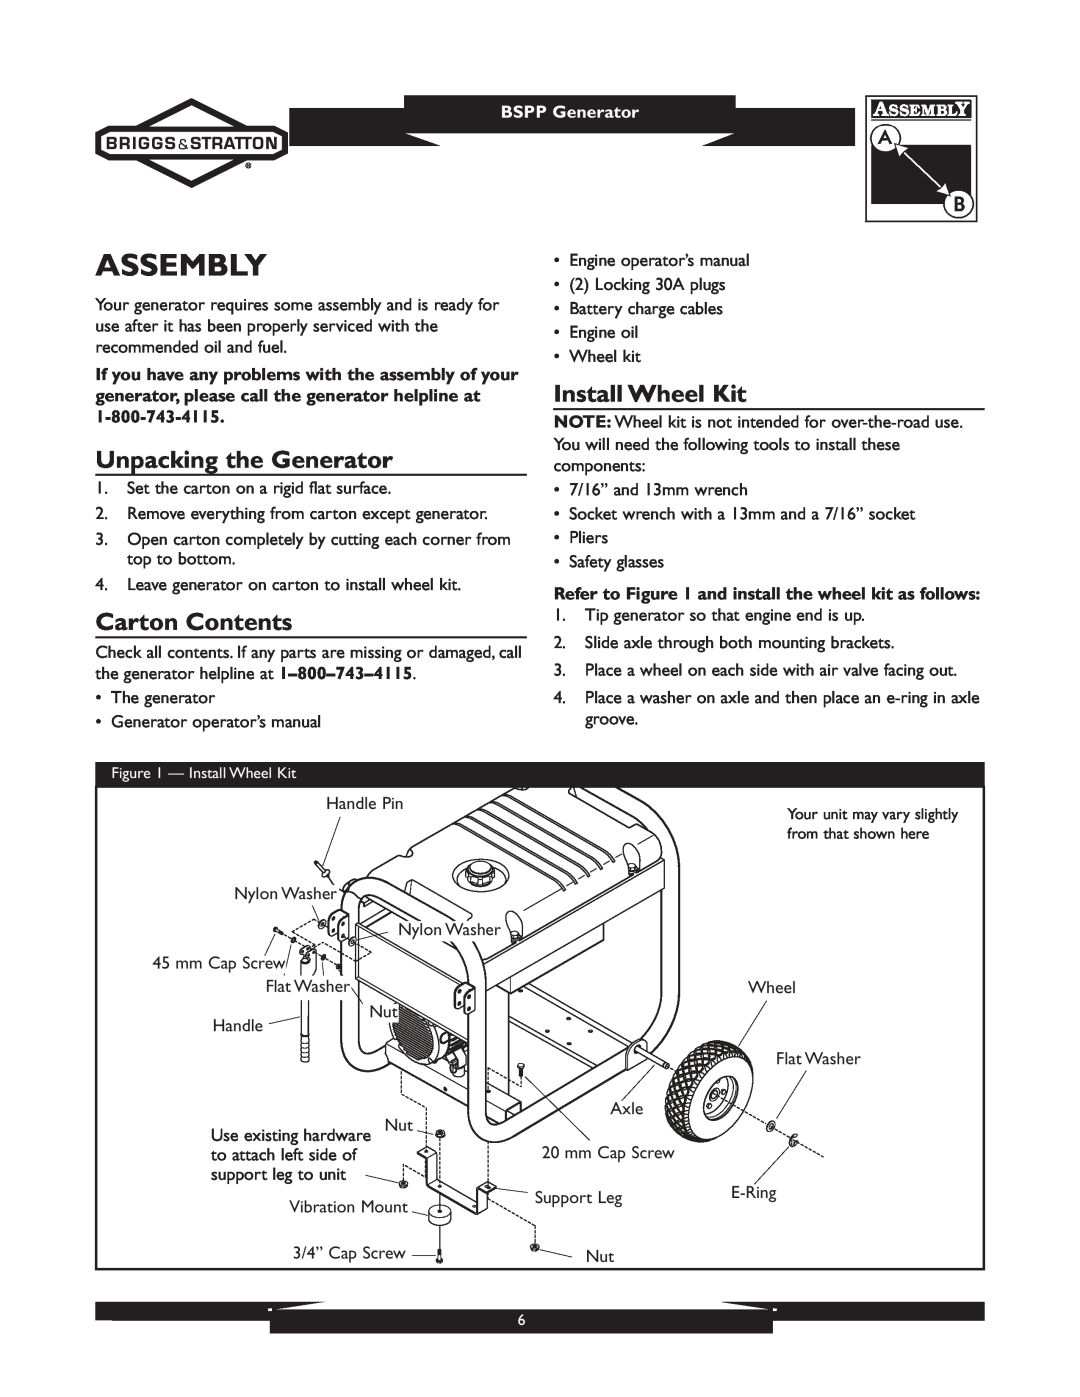 Briggs & Stratton 01933-1 Assembly, Unpacking the Generator, Install Wheel Kit, Carton Contents, BSPP Generator 